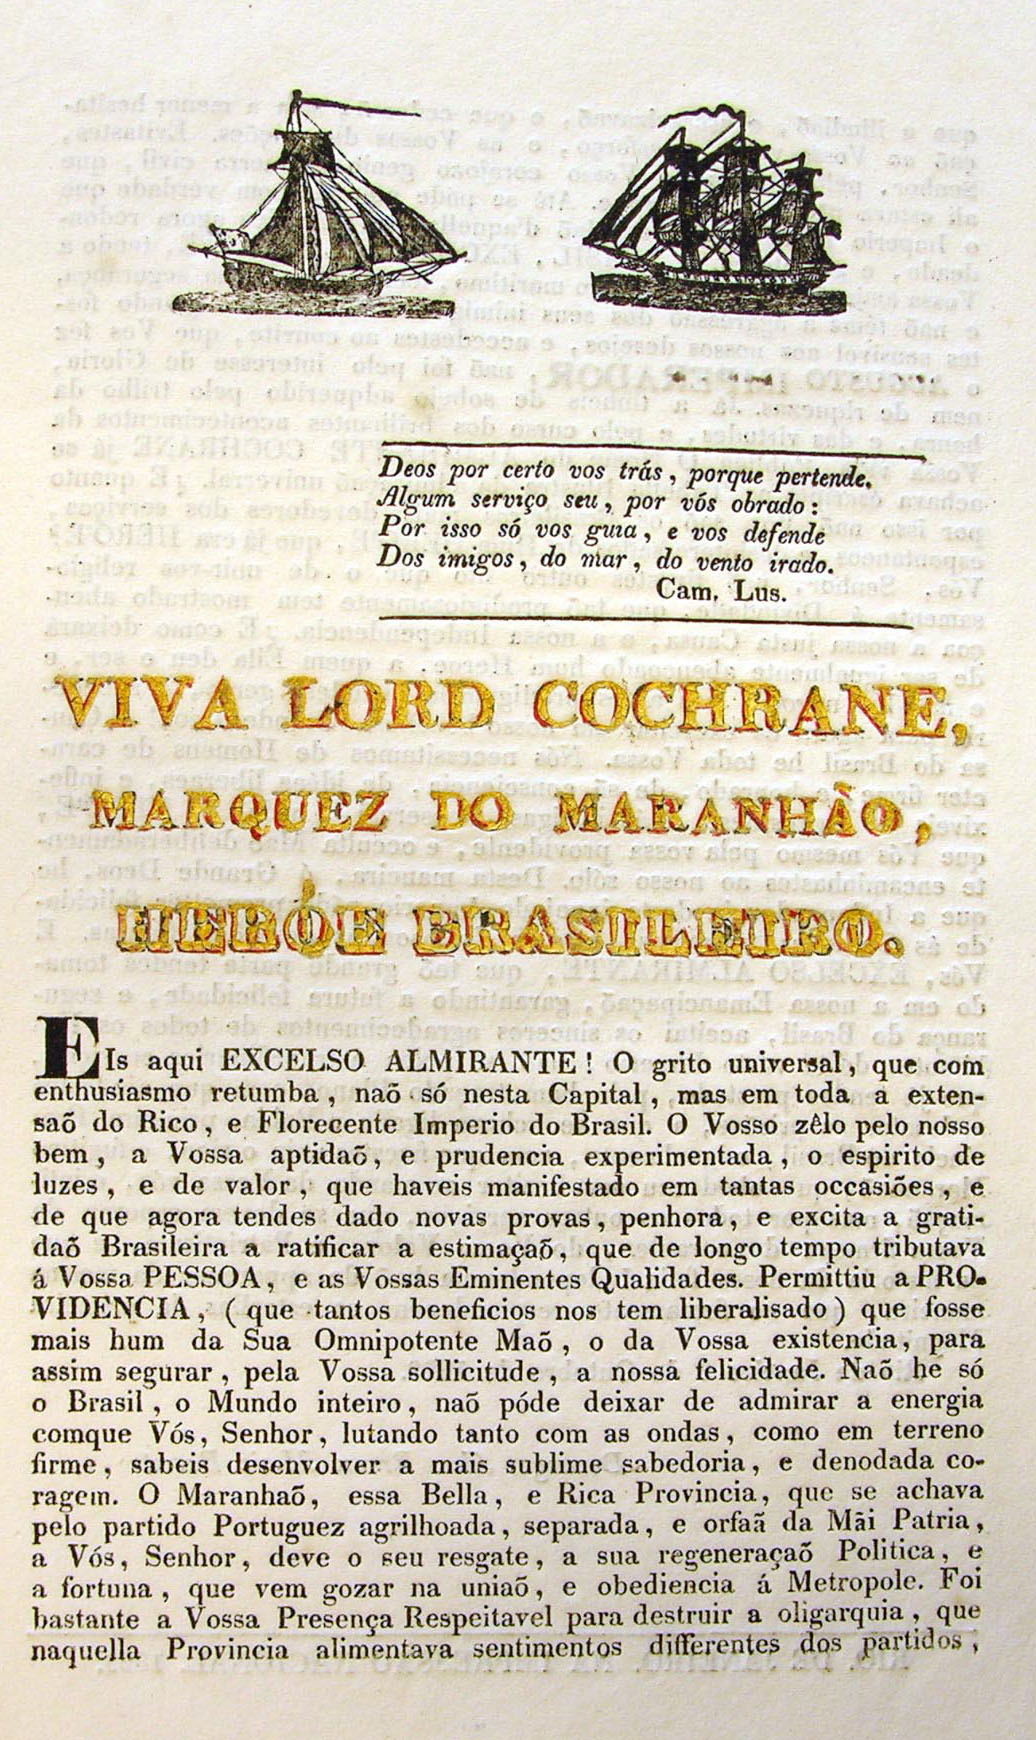 Address to Lord Cochrane from the government of Brazil, 1823 in gratitude for his role in helping overthrow Portuguese rule. It begins 'Long Live Lord Cochrane, Marquis of Maranhao, Hero of Brazil', and is part of the extensive archive of his time in South America. National Records of Scotland 